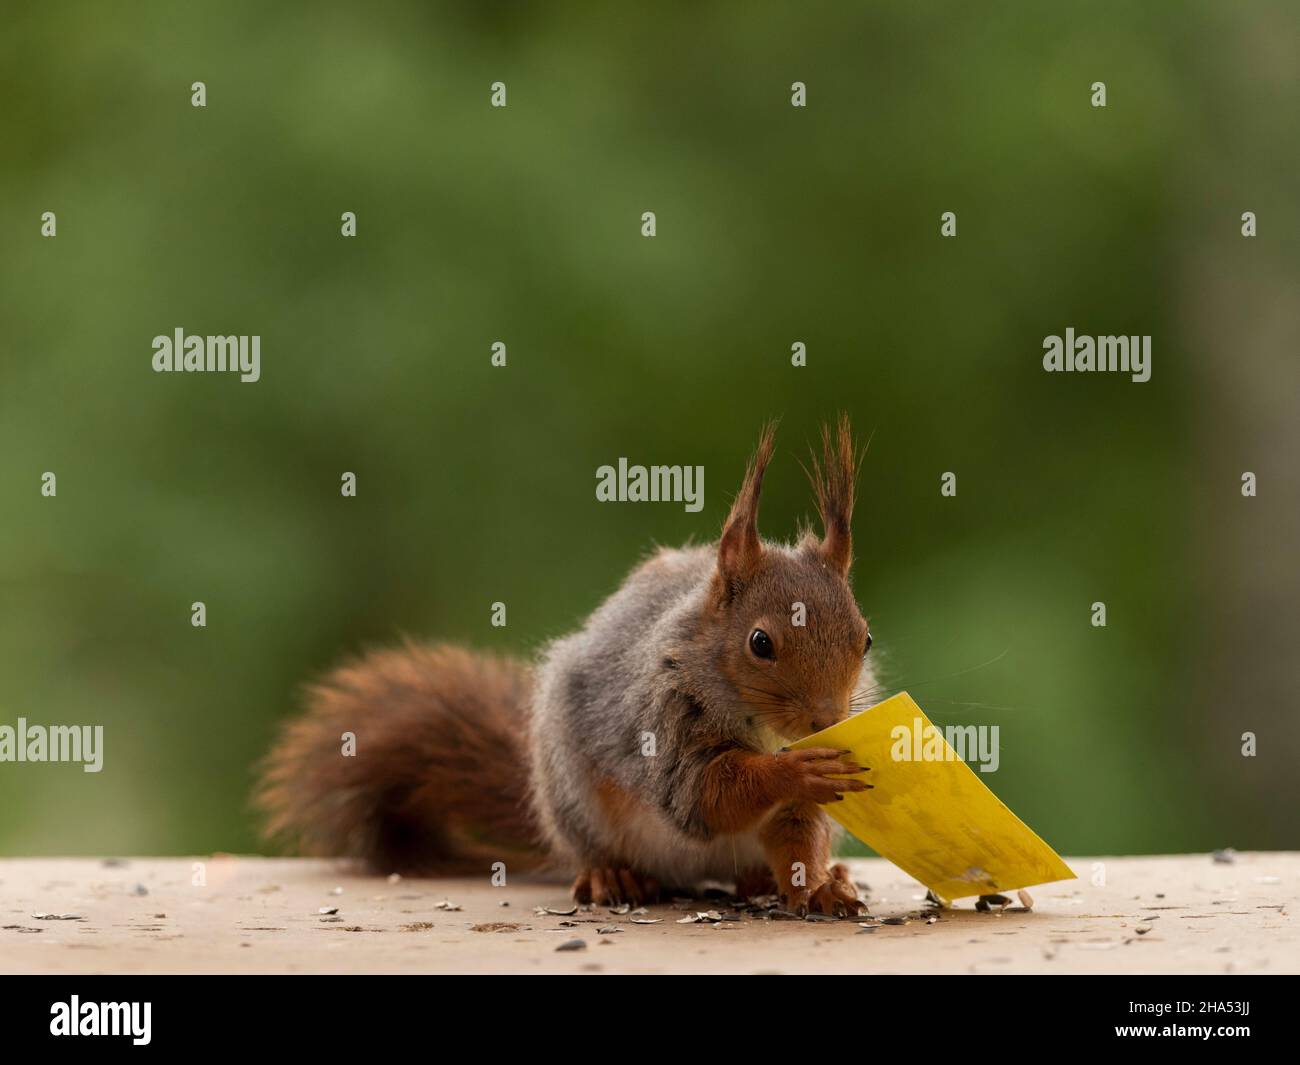 red squirrel is holding a yellow card Stock Photo